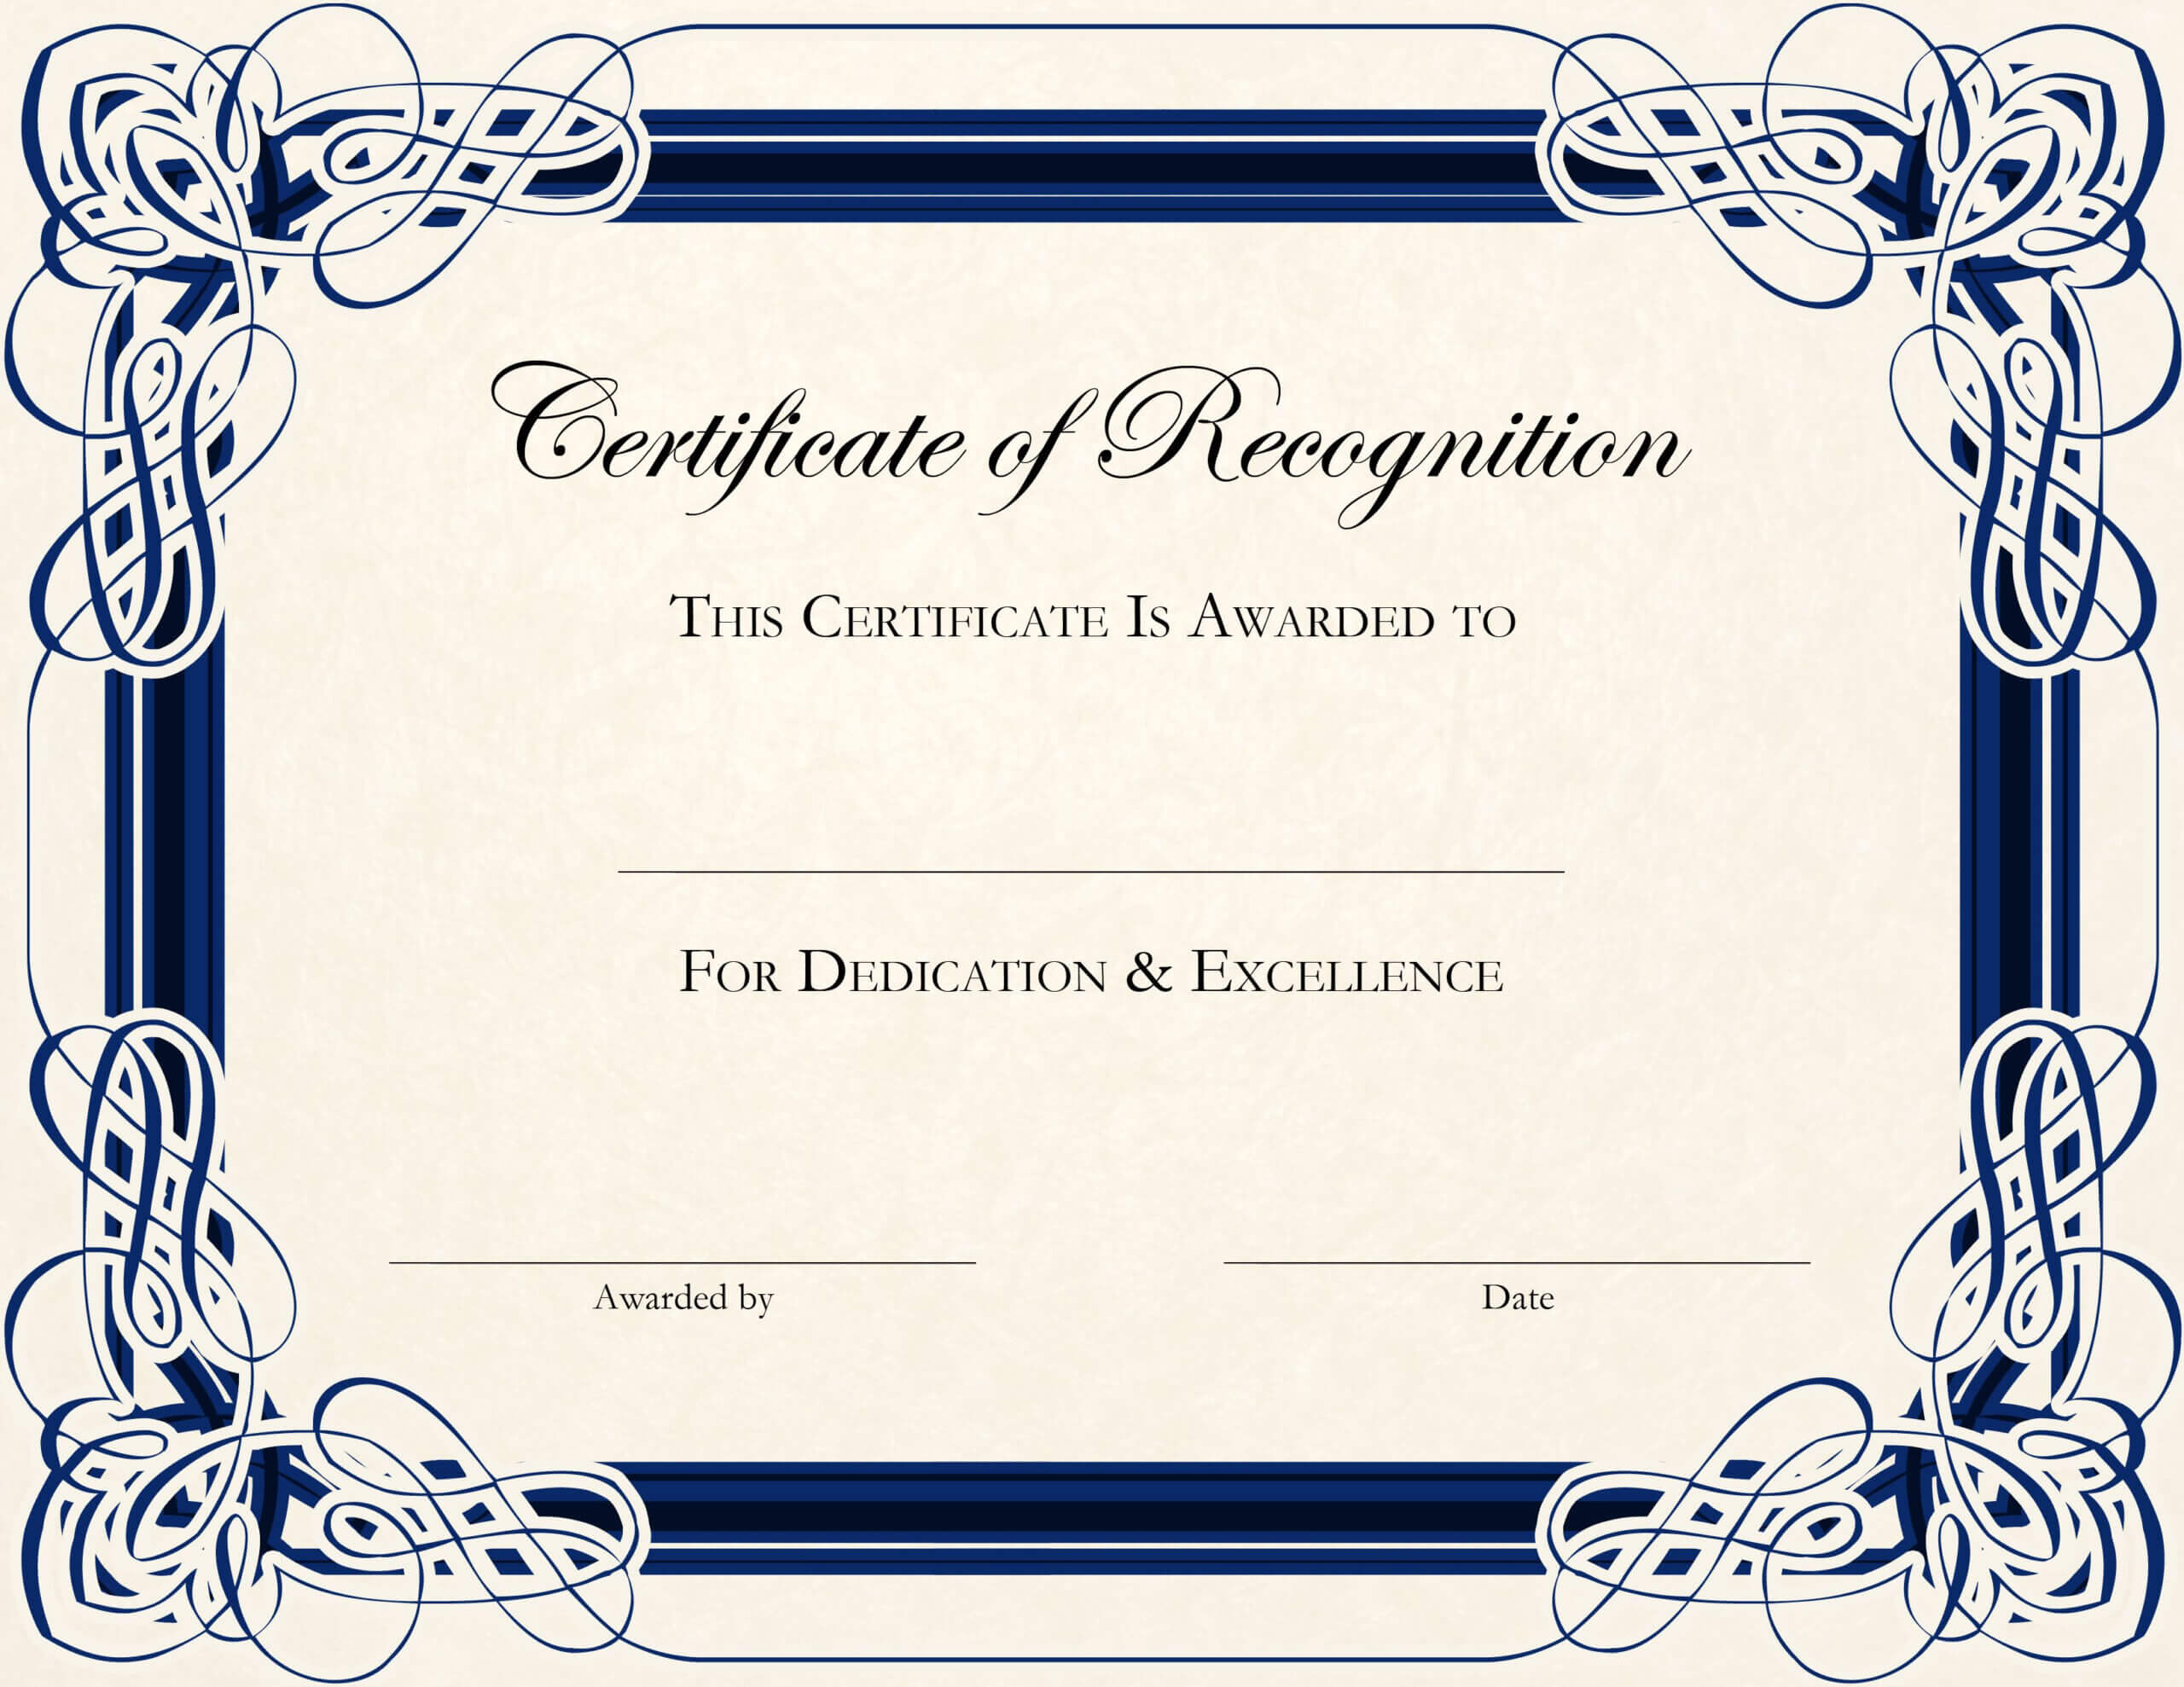 Certificate Template Designs Recognition Docs | Certificate Inside Sample Certificate Of Recognition Template